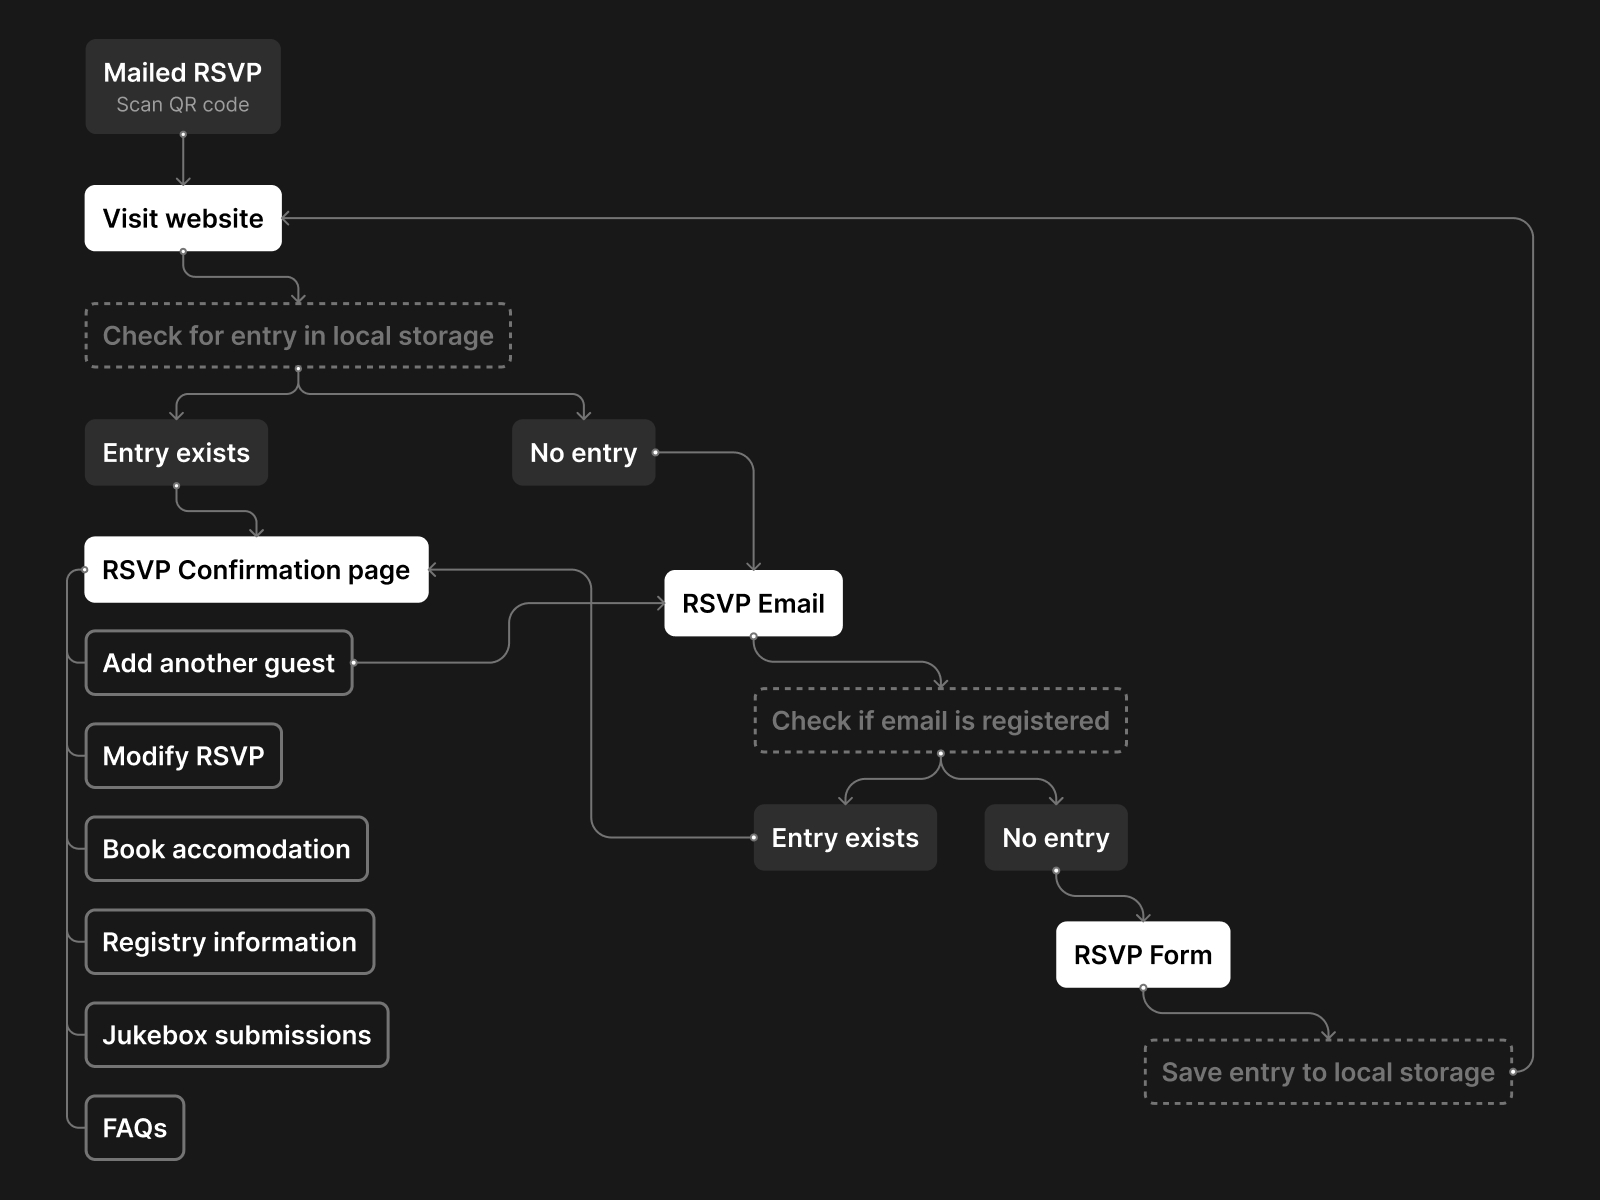 User journey mapping for RSVP flow.